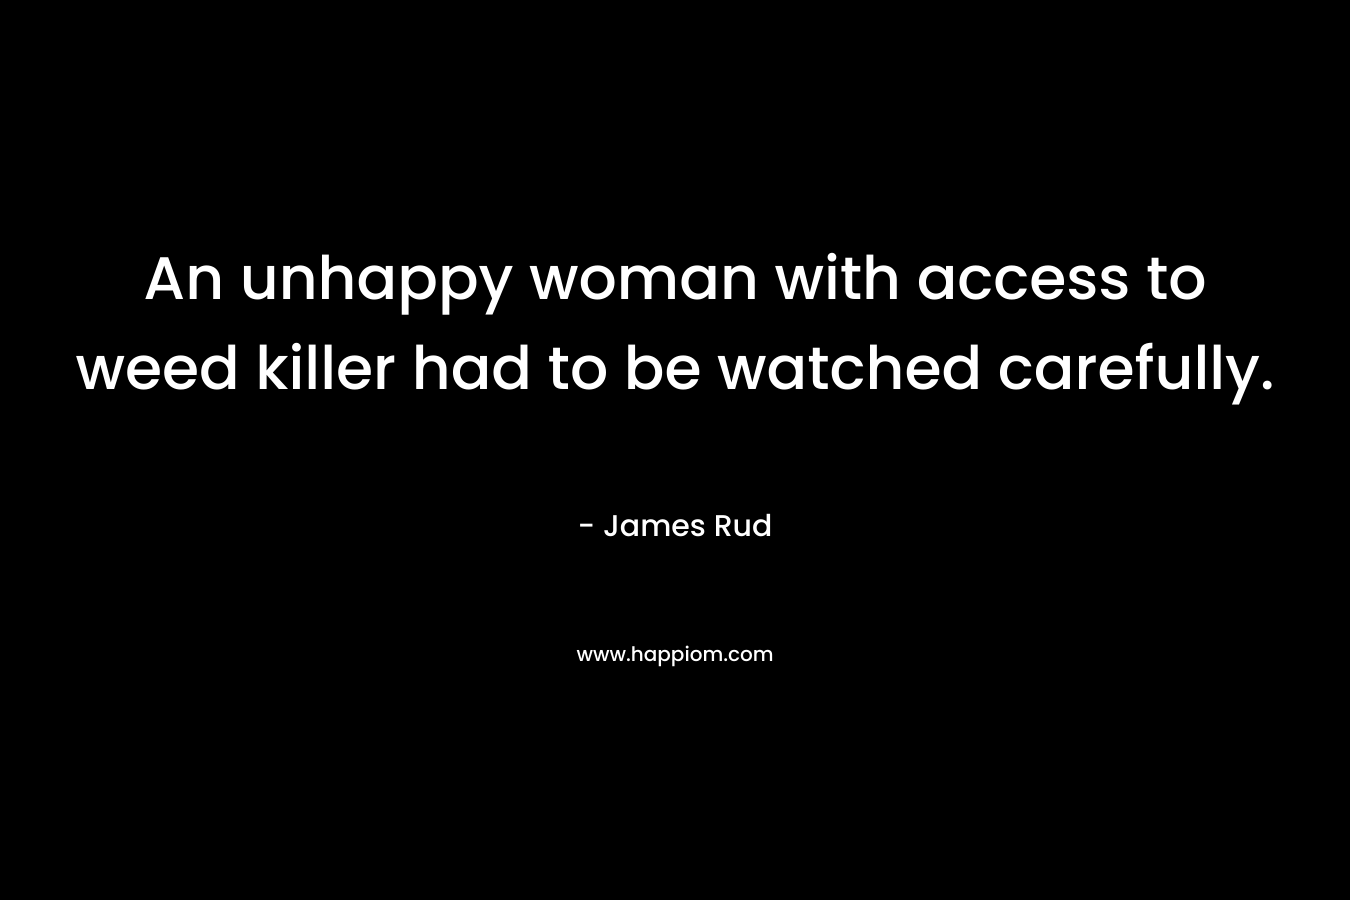 An unhappy woman with access to weed killer had to be watched carefully. – James Rud